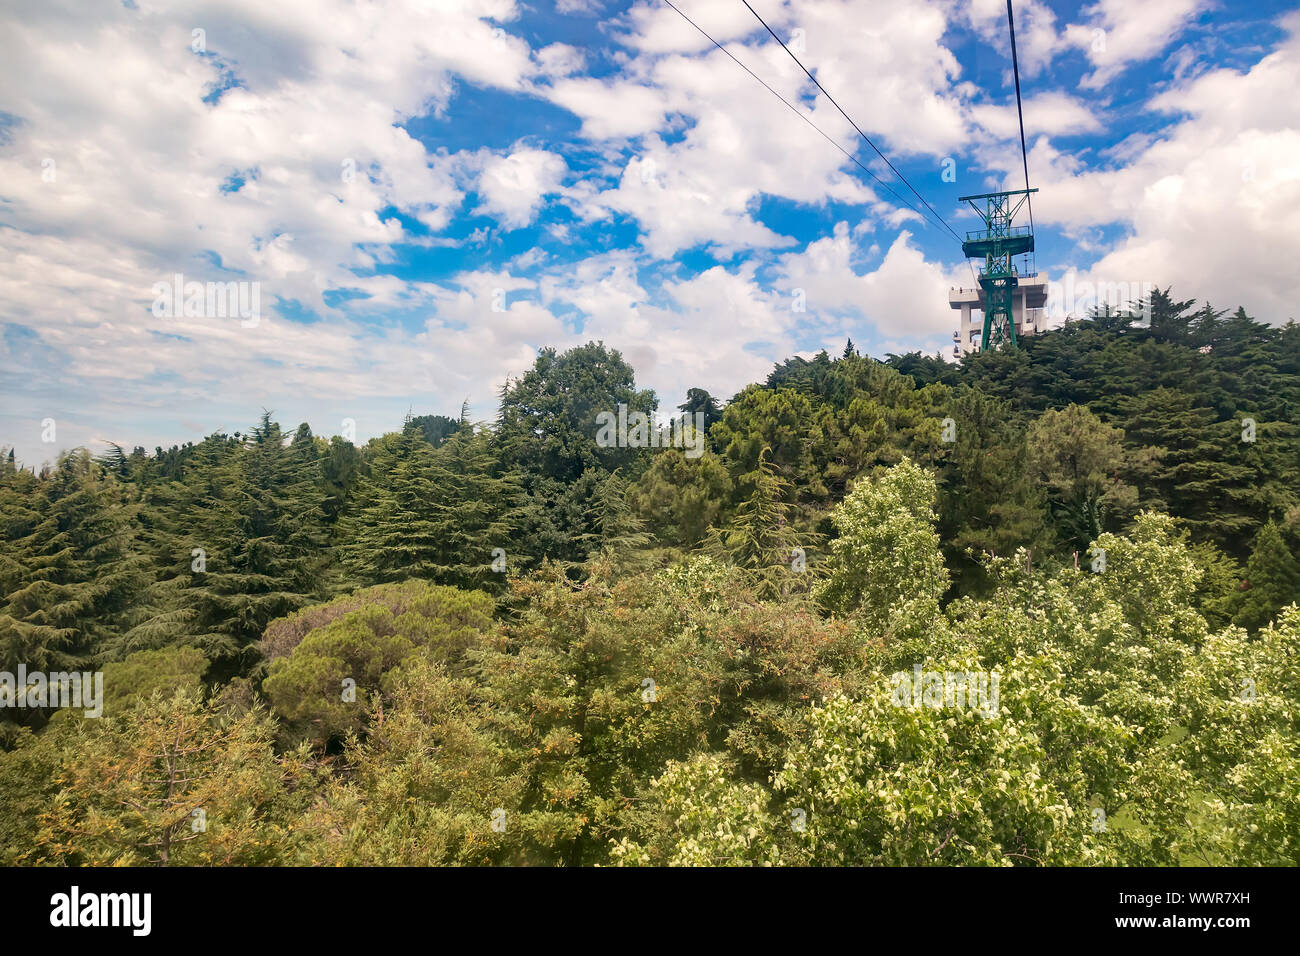 The cable car to the top of the mountain in the resort town. Stock Photo